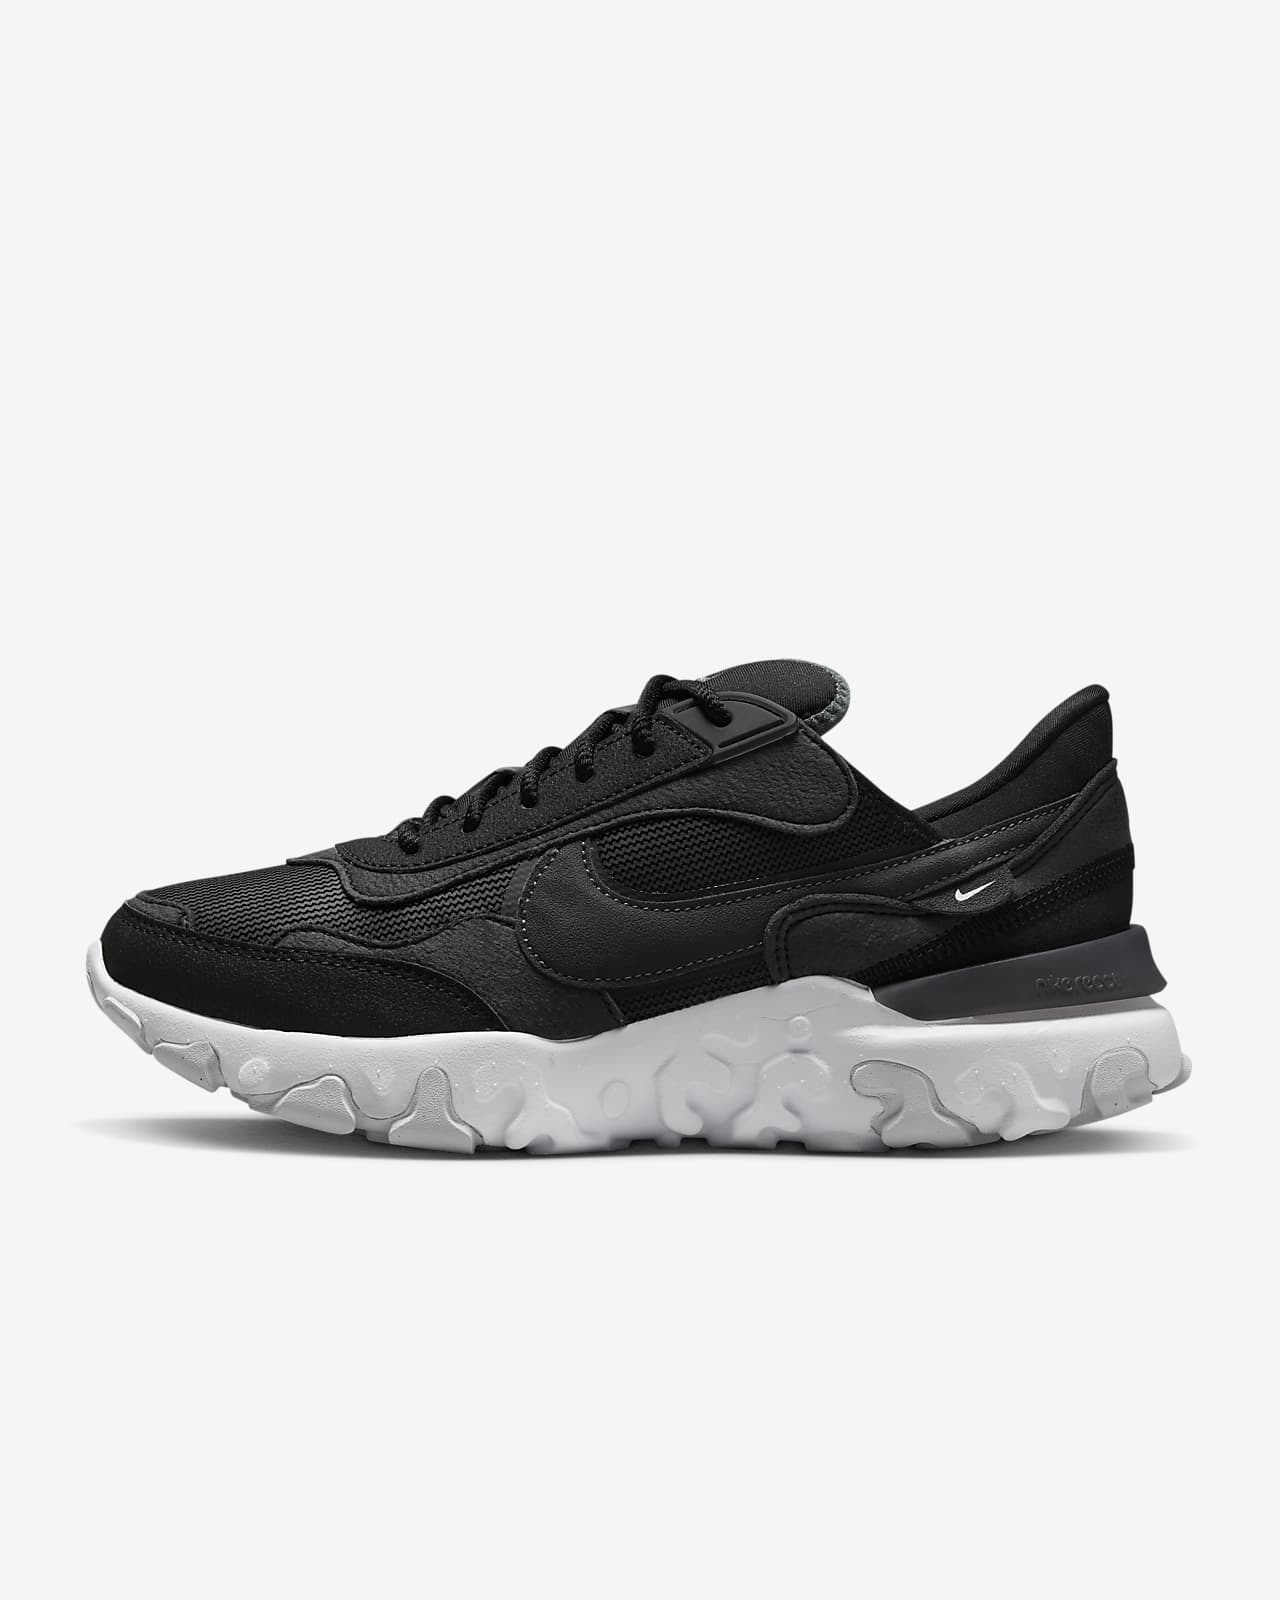 Chaussure Nike React Revision pour femme